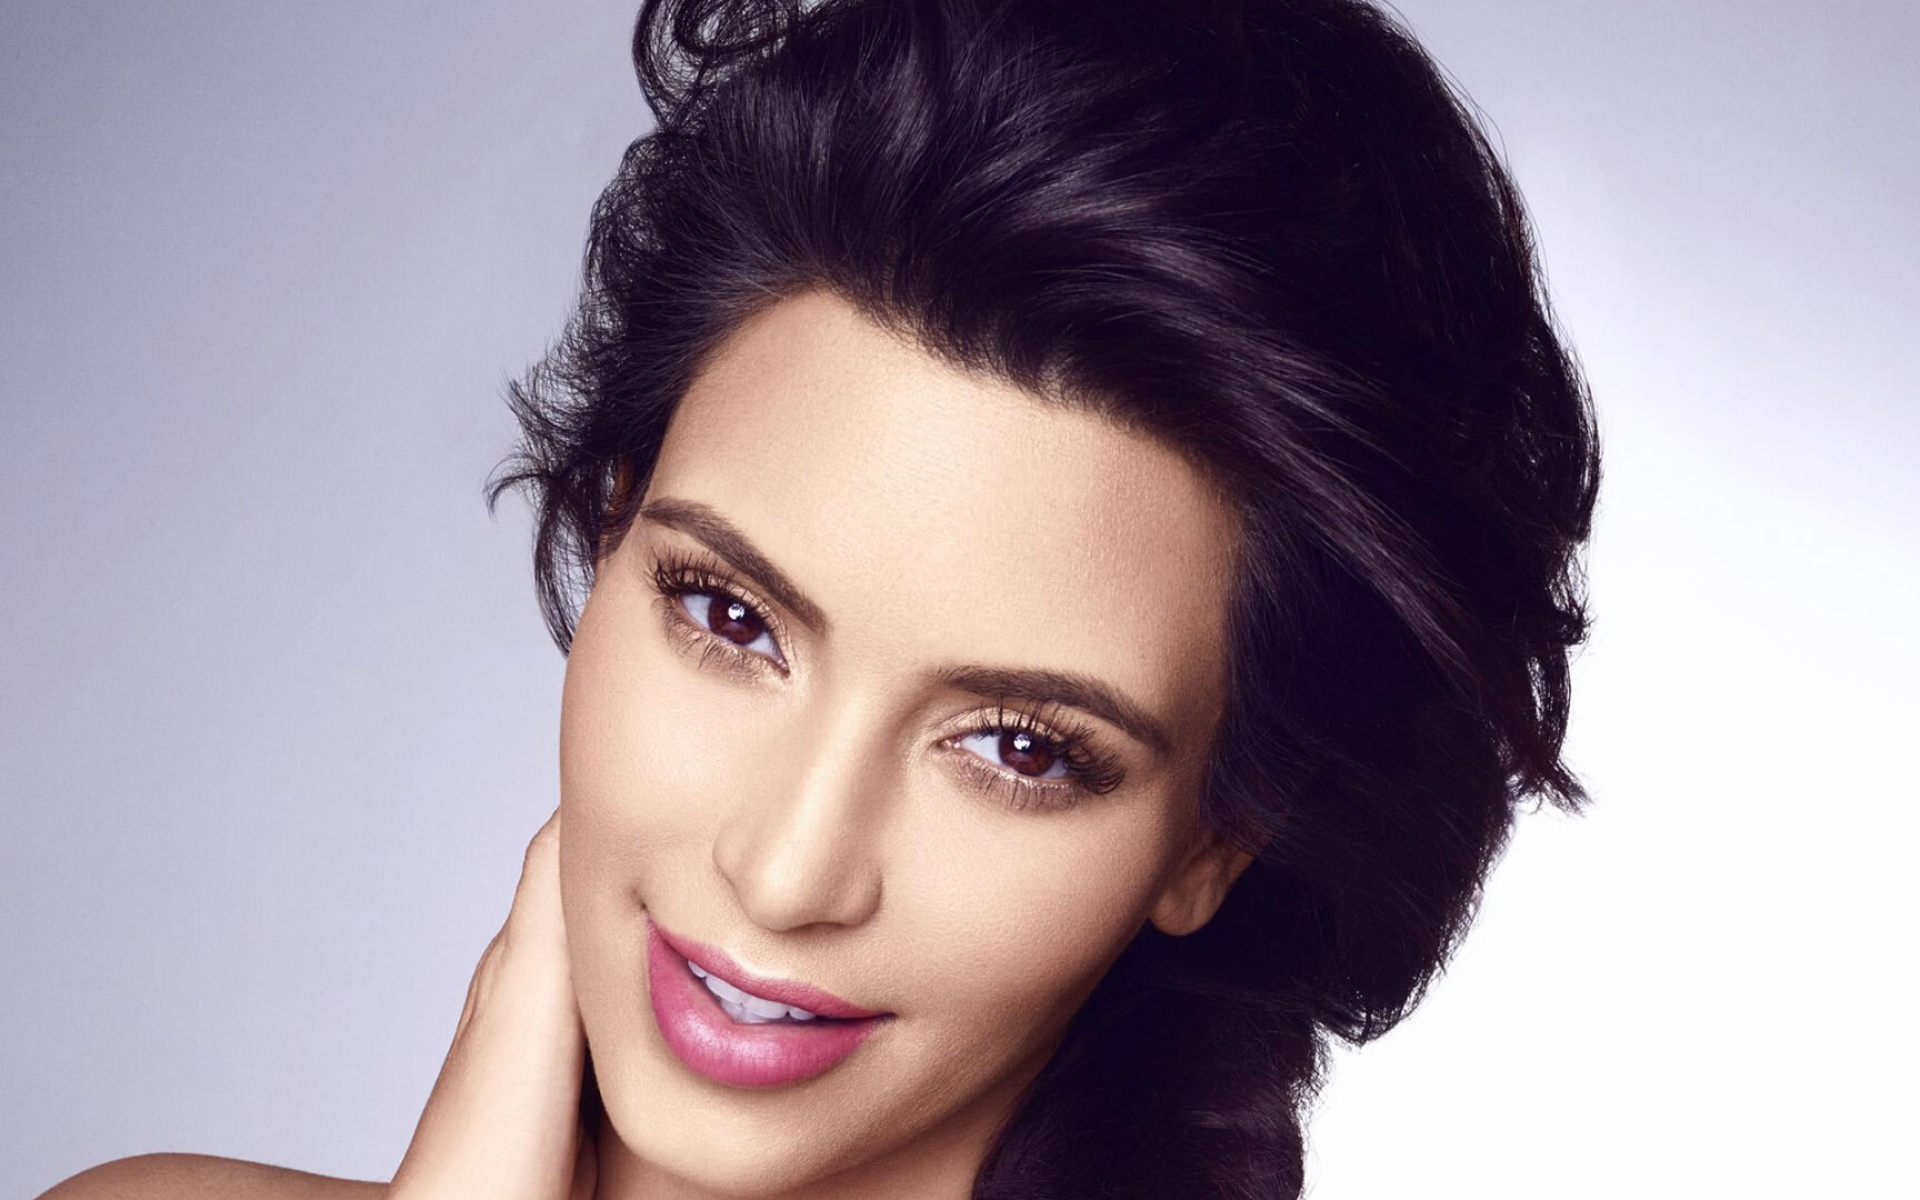 Kim Kardashian: One of the most recognizable and iconic celebrities in the world, TV star. 1920x1200 HD Background.